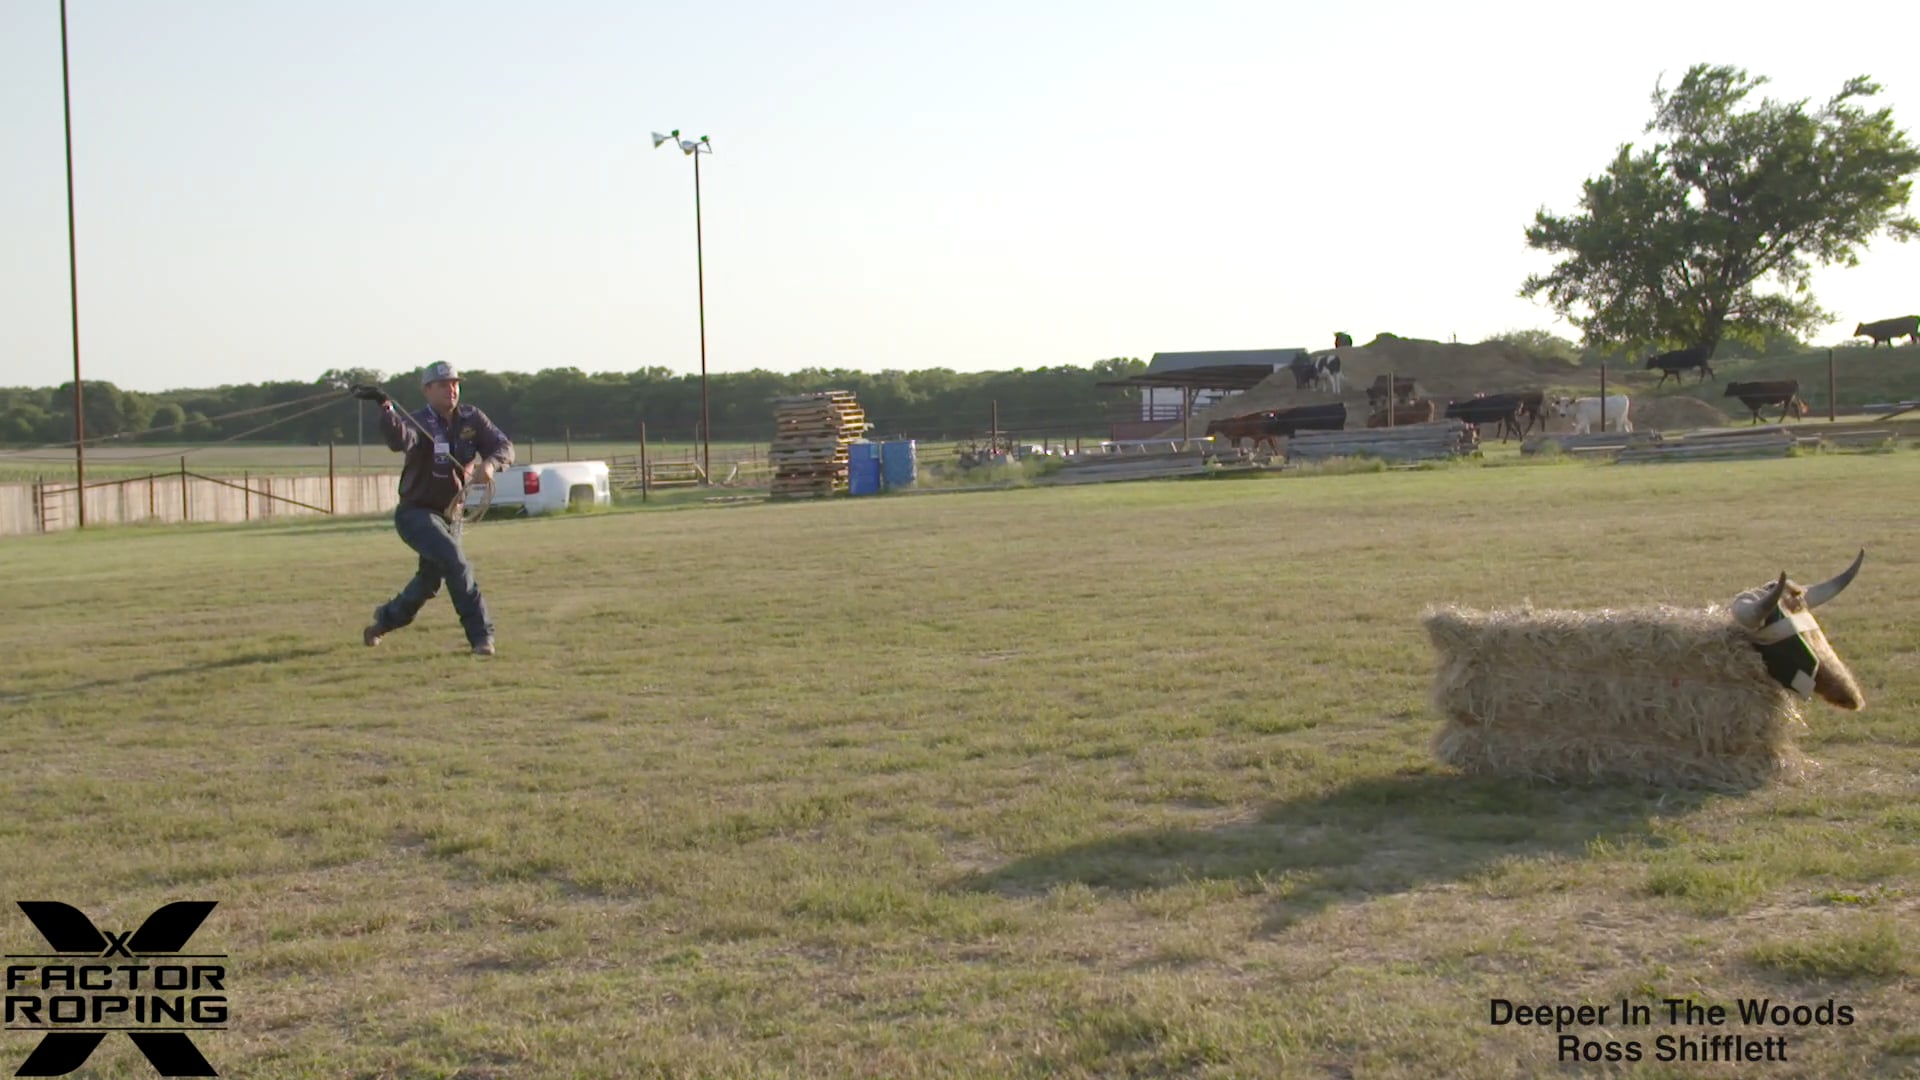 OTT Watch Dustin Egusquiza rope the dummy with a 50 foot rope in slow motion!